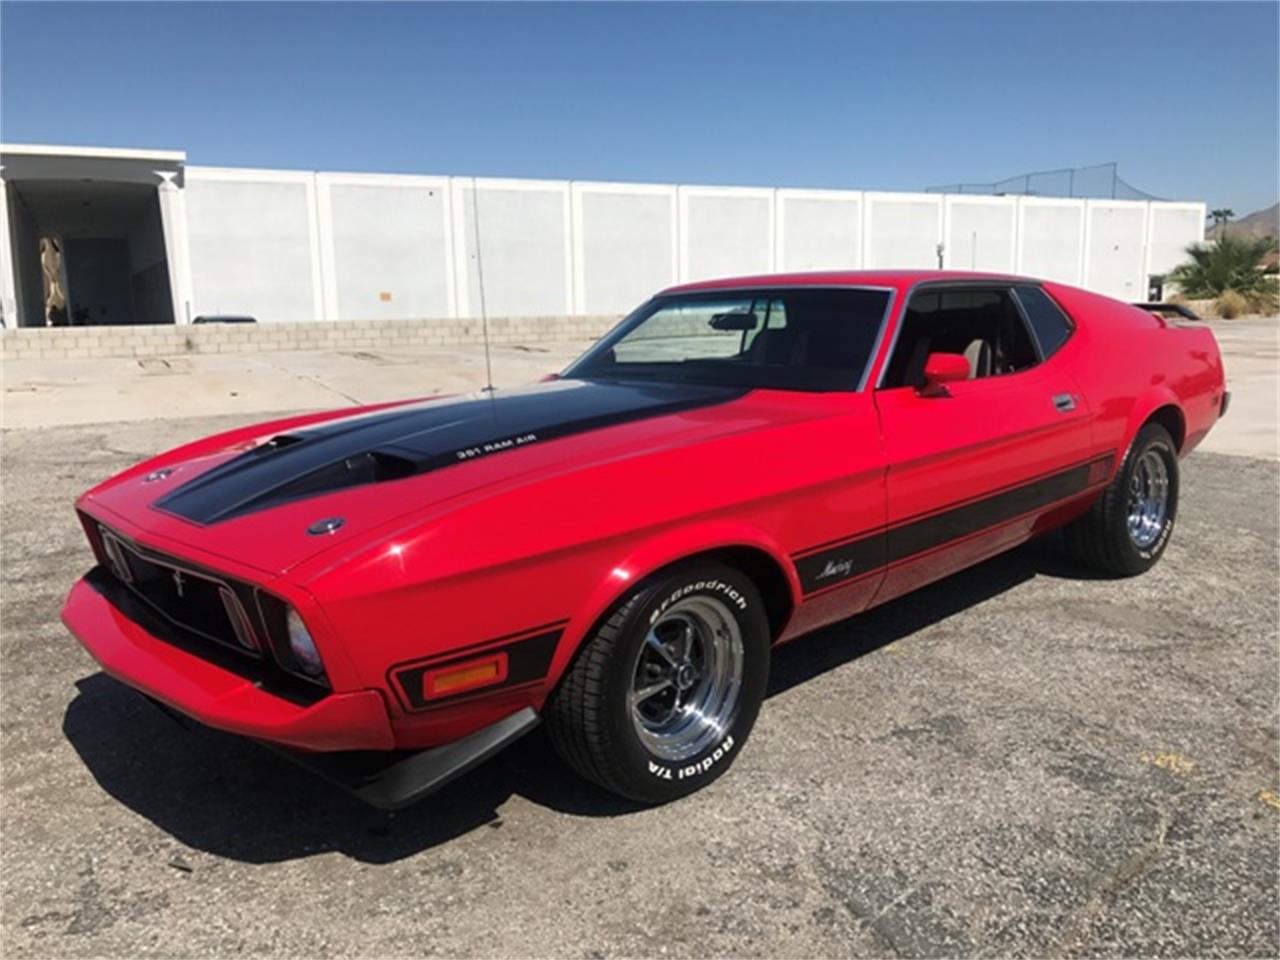 1973 Ford Mustang Mach 1 for Sale | ClassicCars.com | CC-1033008